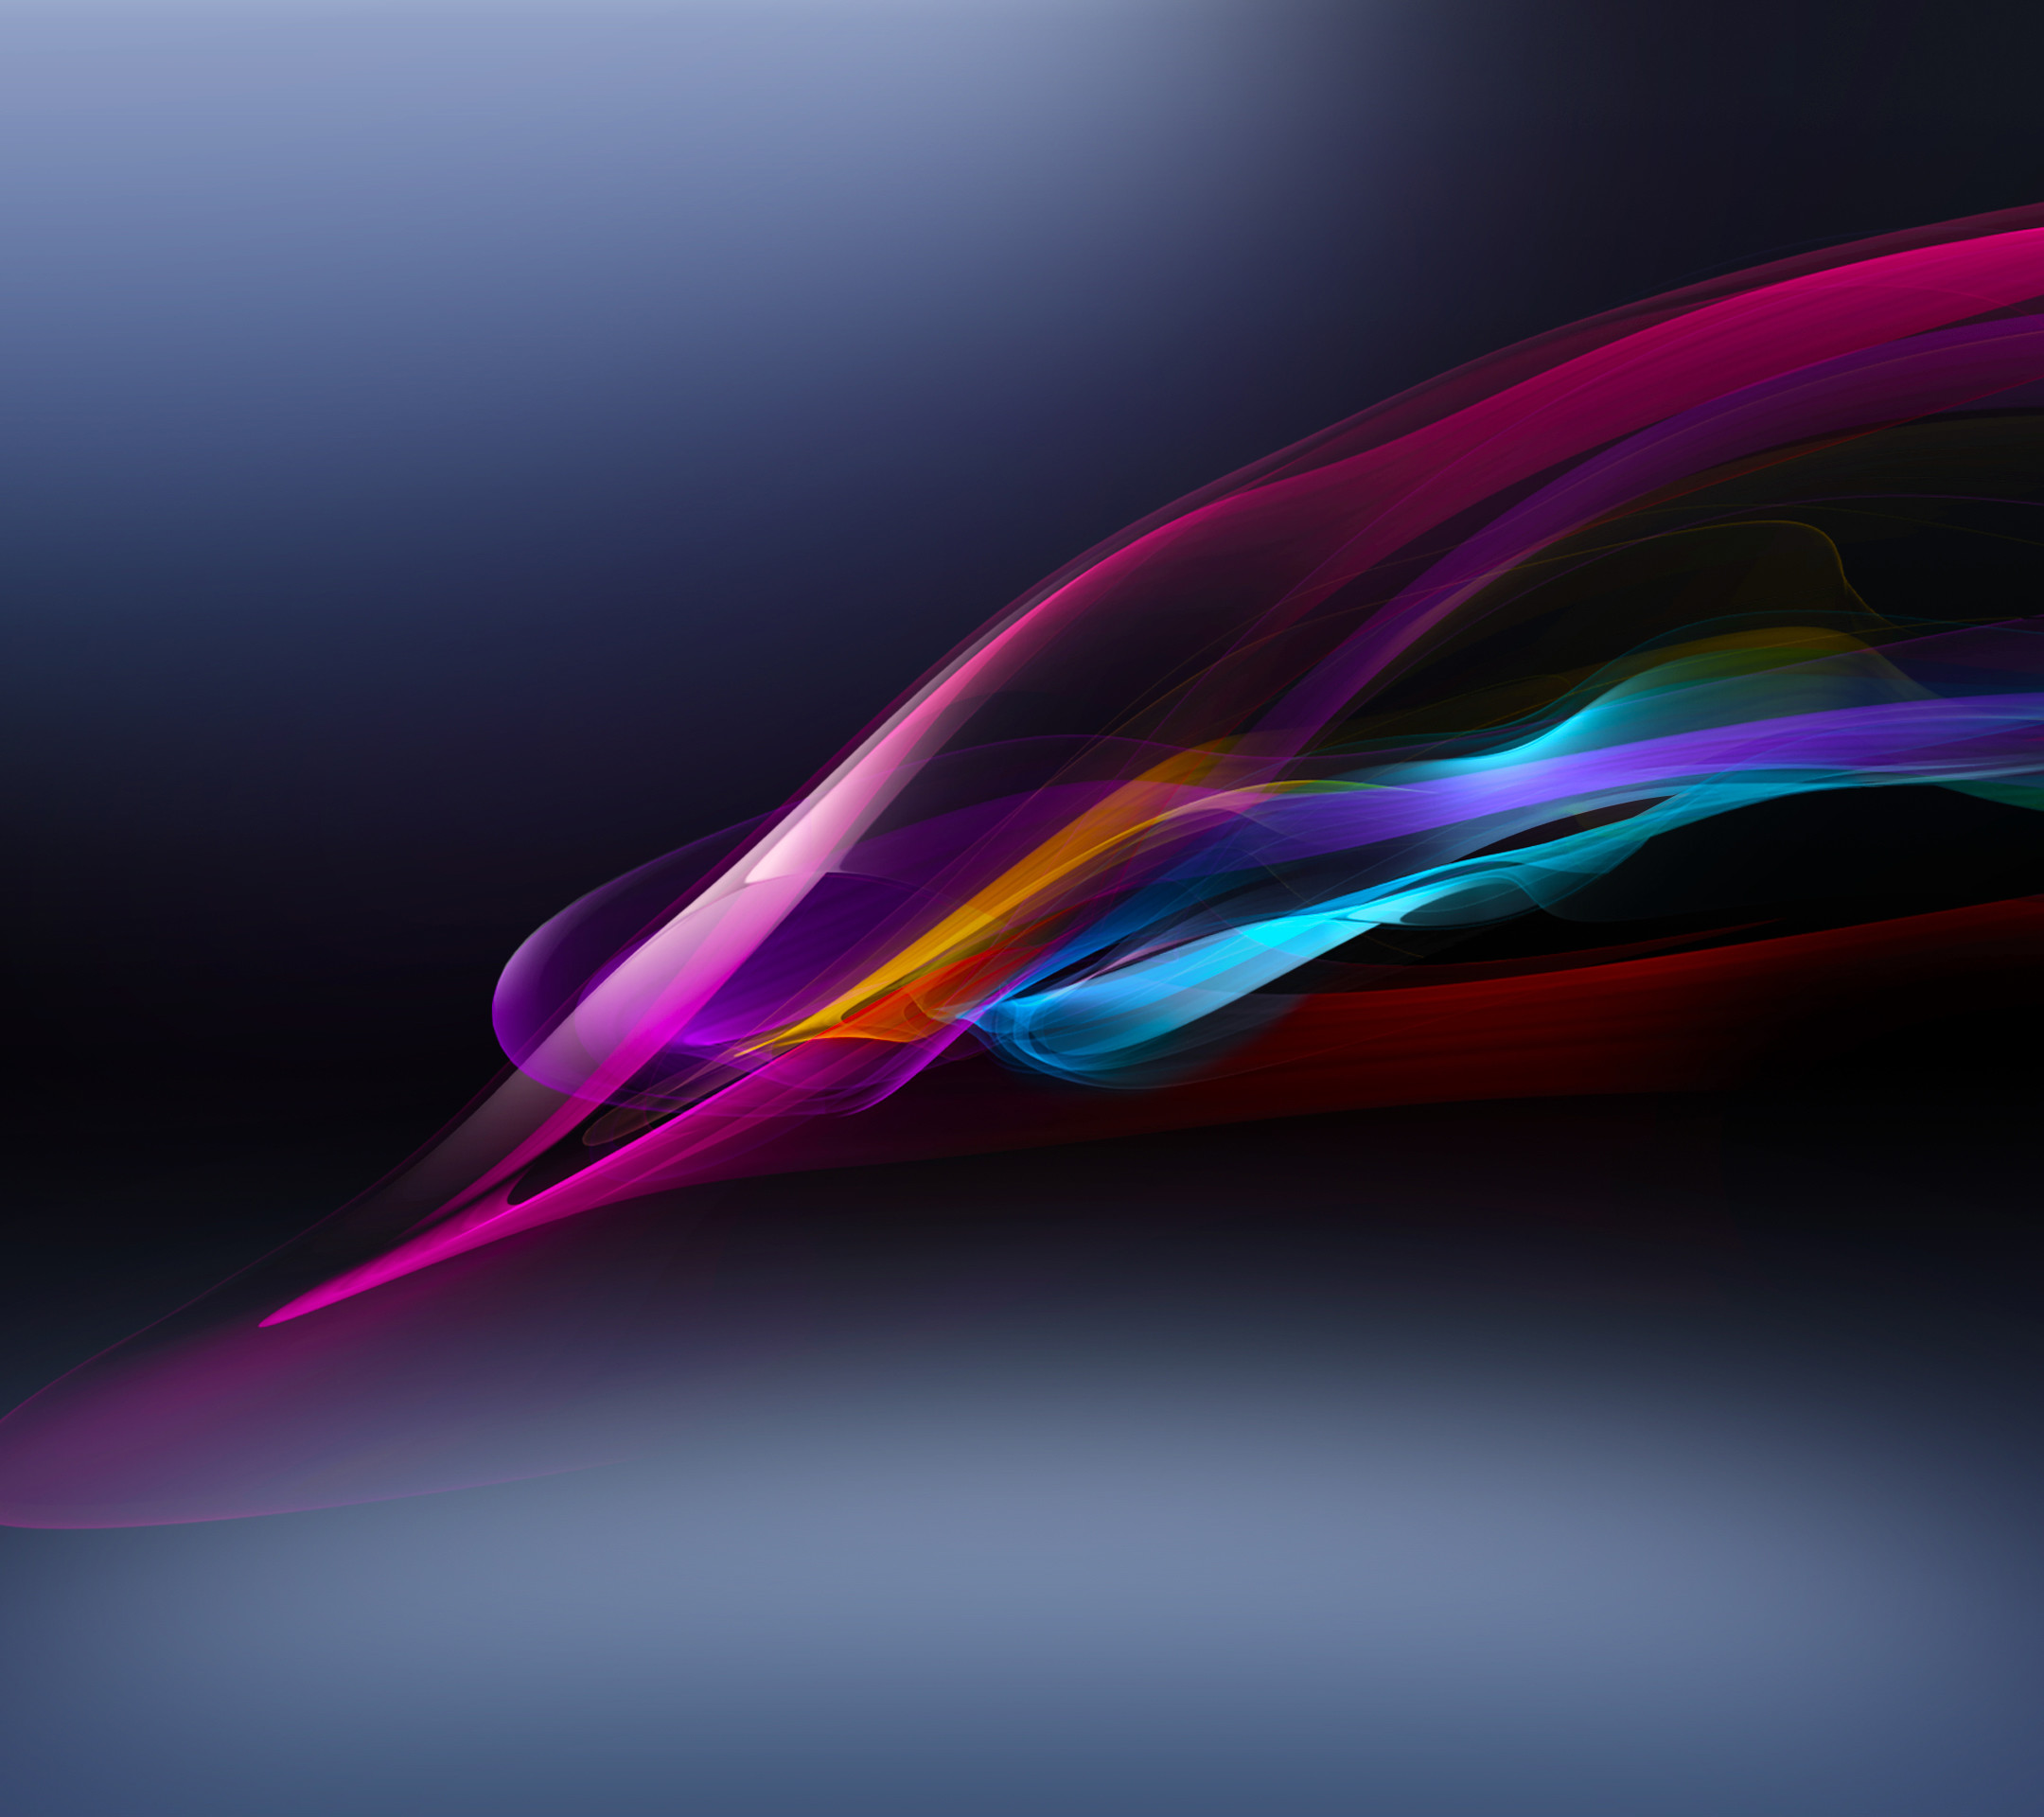 Related Wallpapers. hi-tech, Sony Xperia, cosmic, abstraction, digital,  smoke, background